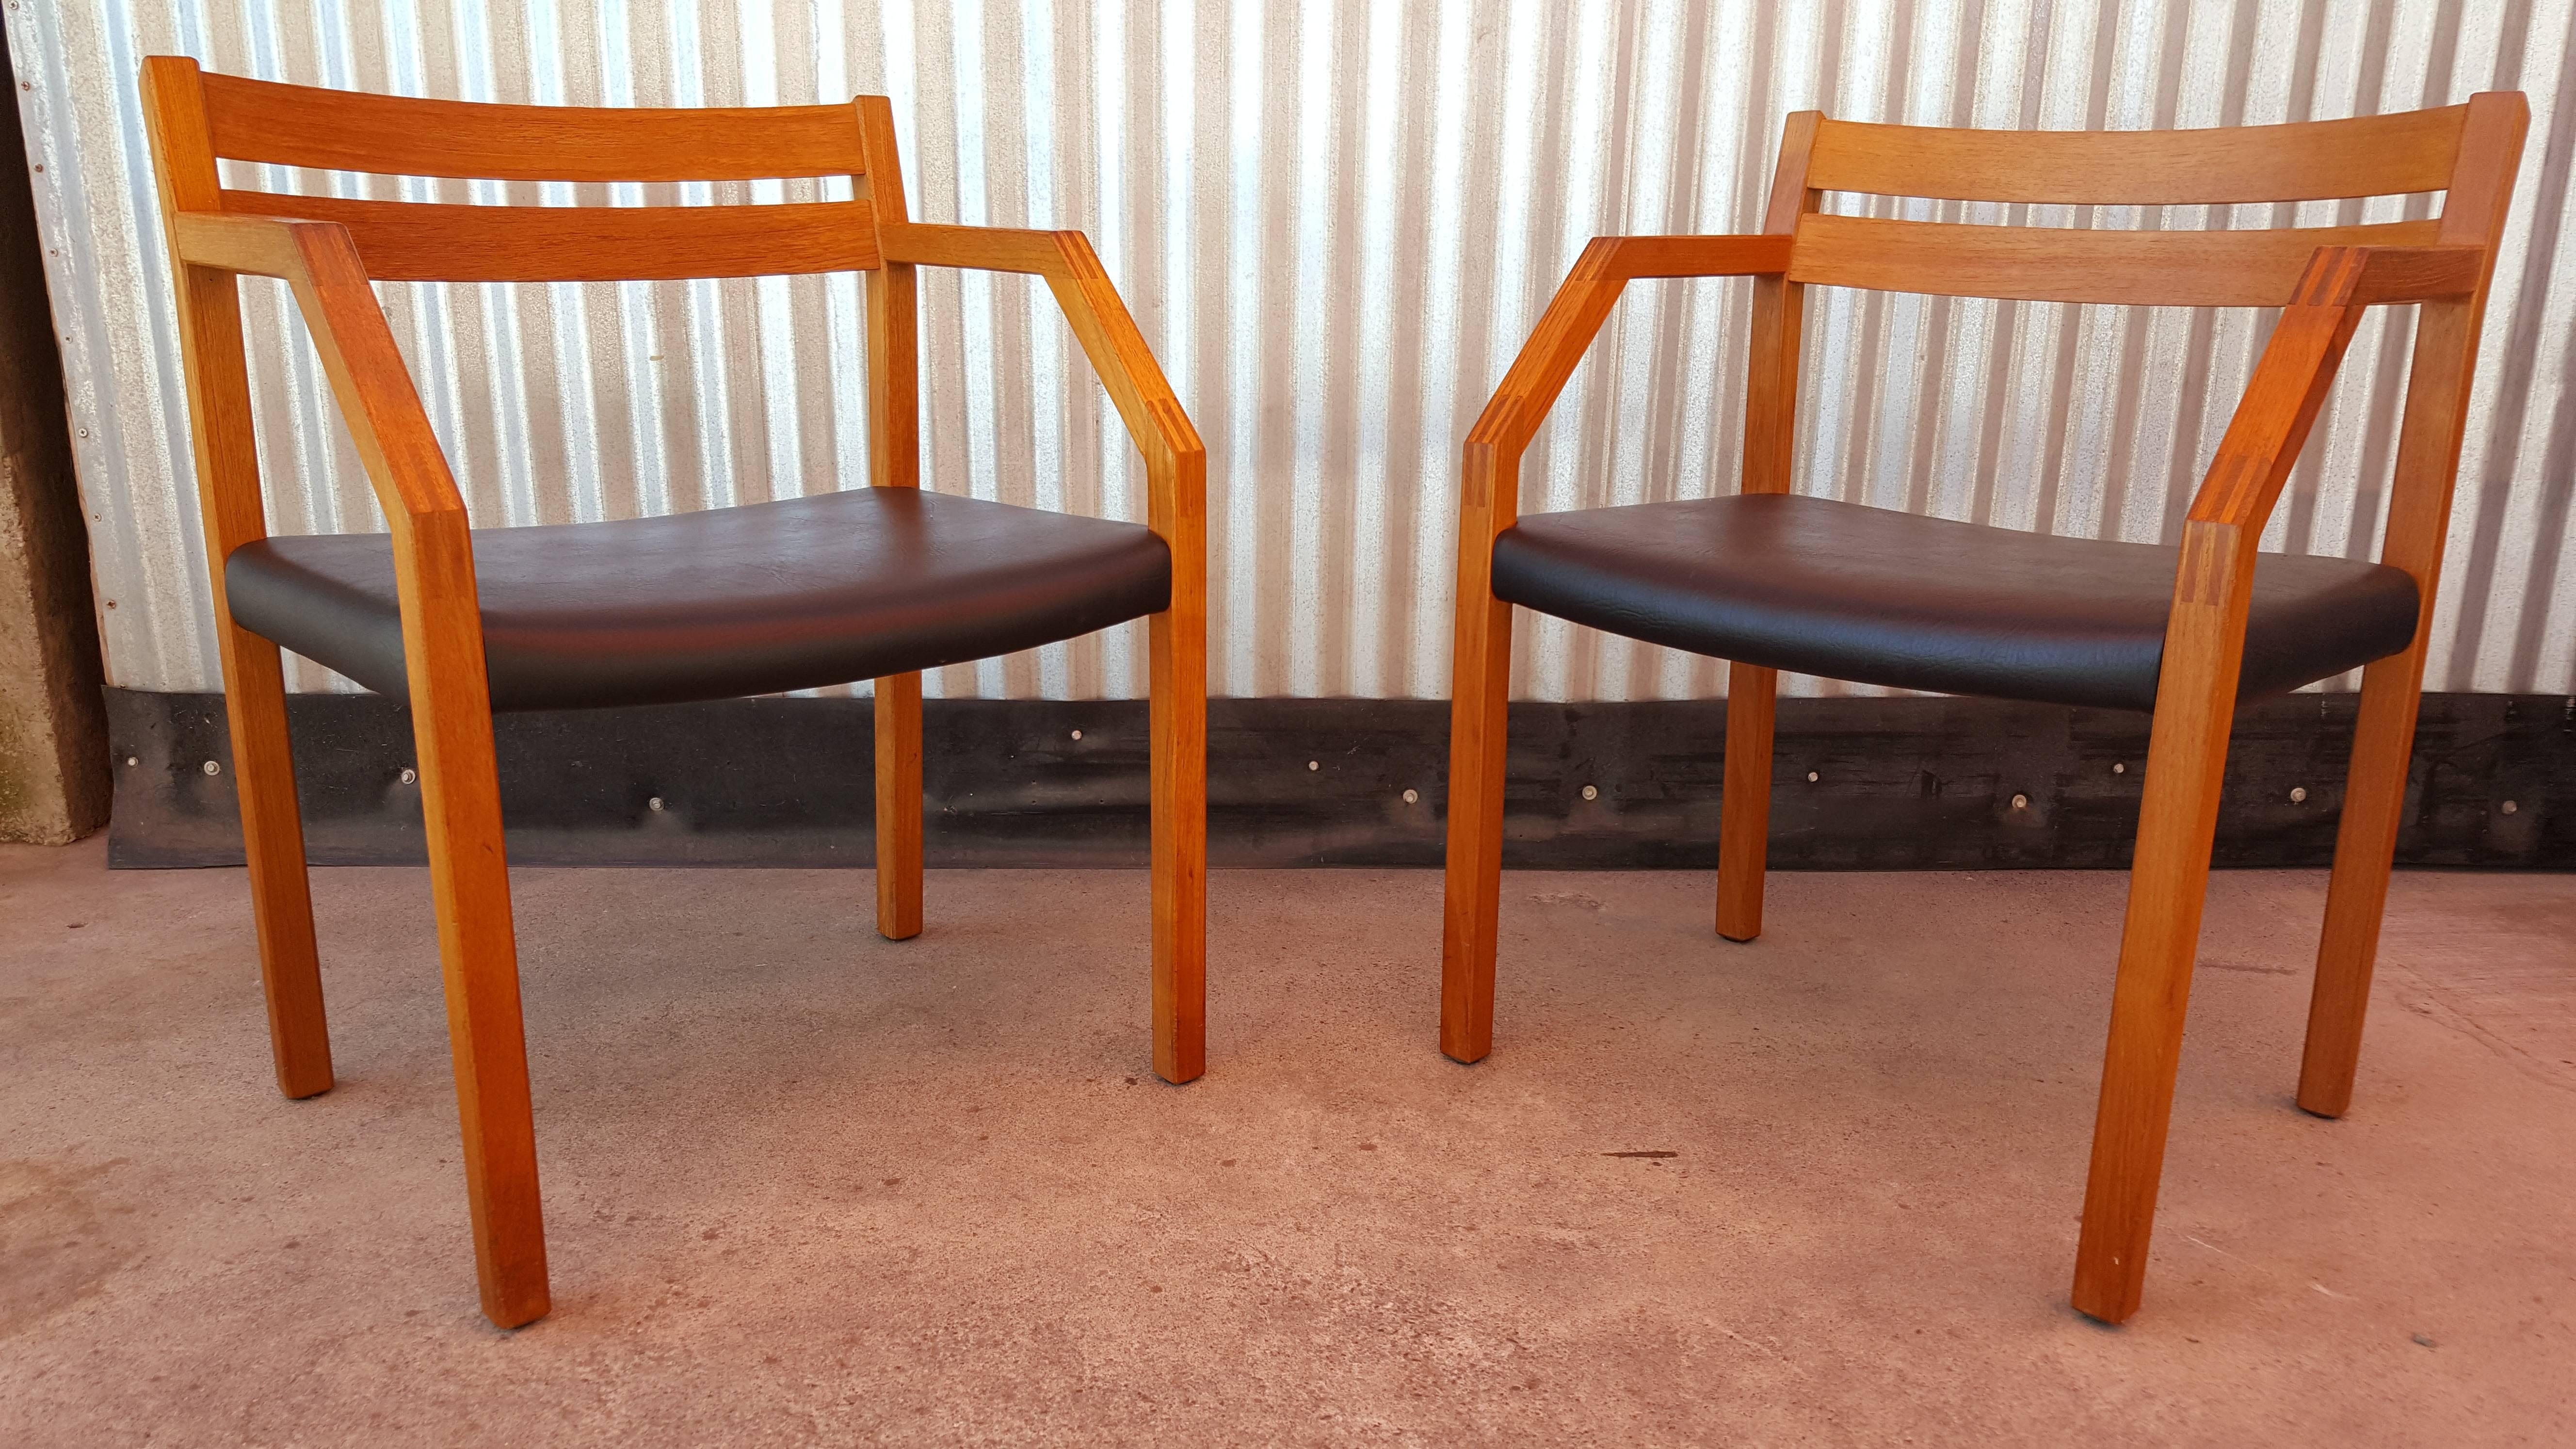 A pair of Danish Modern armchairs by Niels Otto Moller for J L Moller. Unusual, bold geometric design with finger-jointed detail. Retaining makers mark with beautiful original finish and original vinyl upholstery, also in excellent condition.